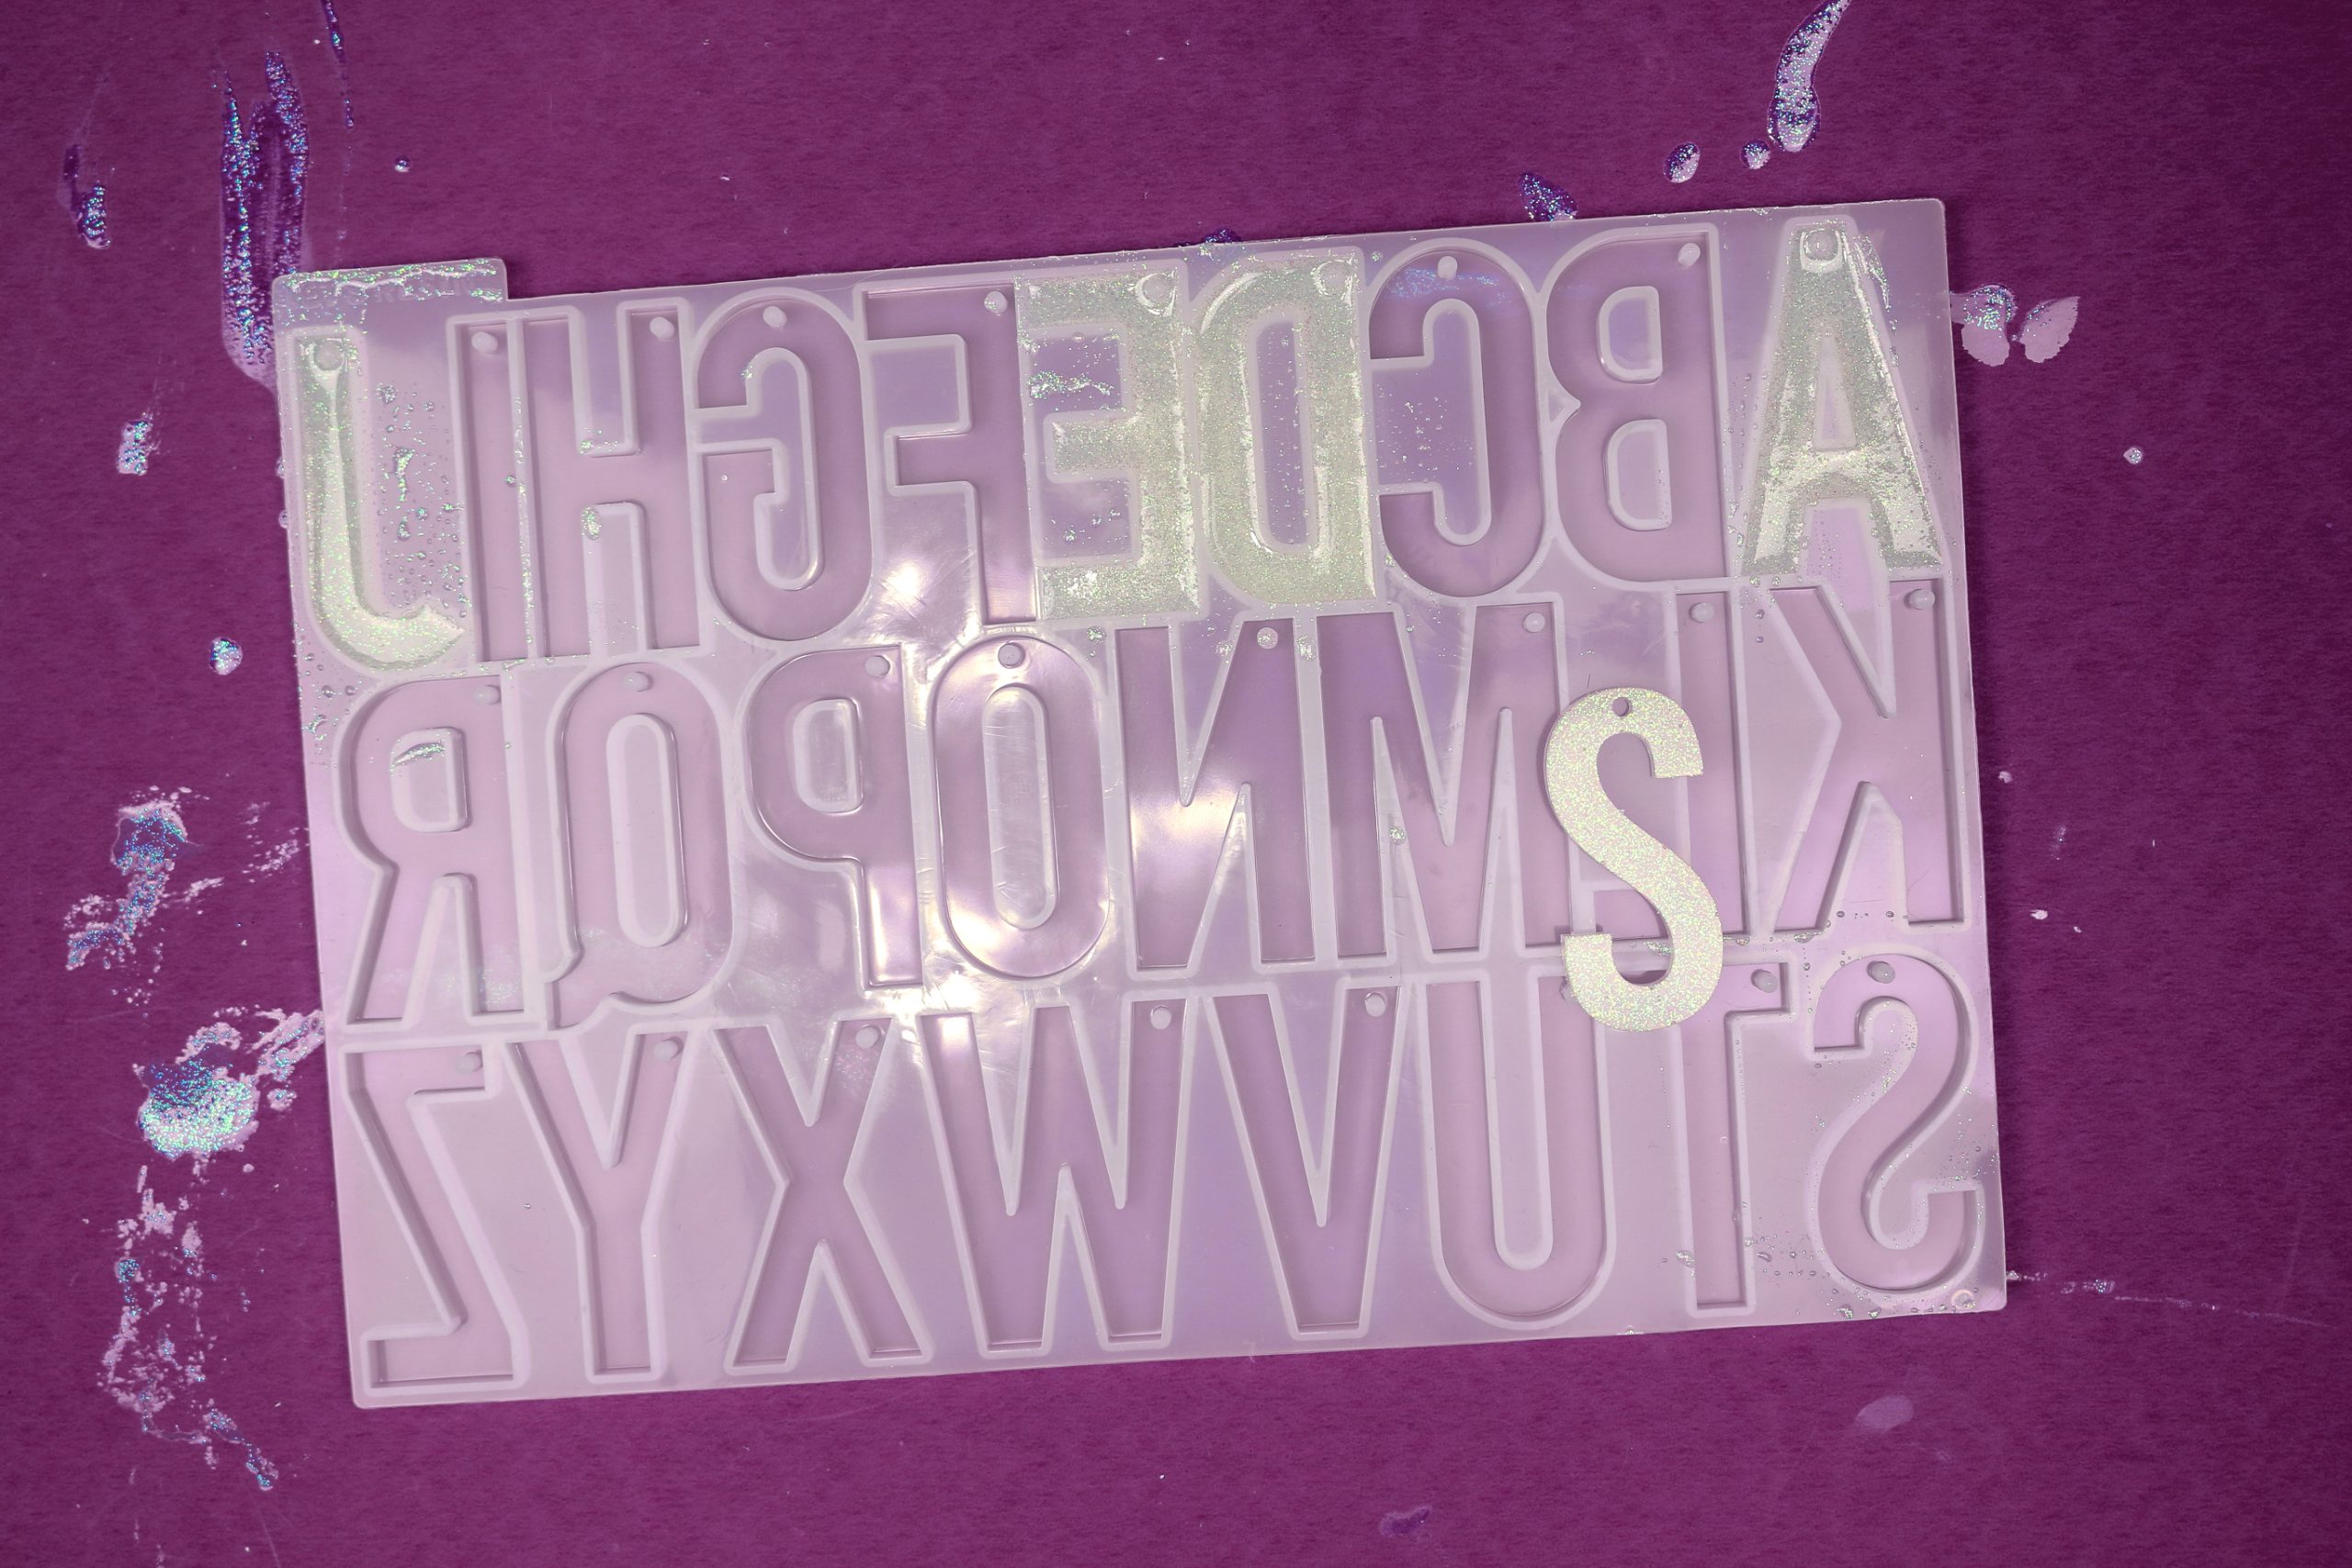 Silicone alphabet mold with a few cavities filled with glittery white resin. One letter has been removed from the mold